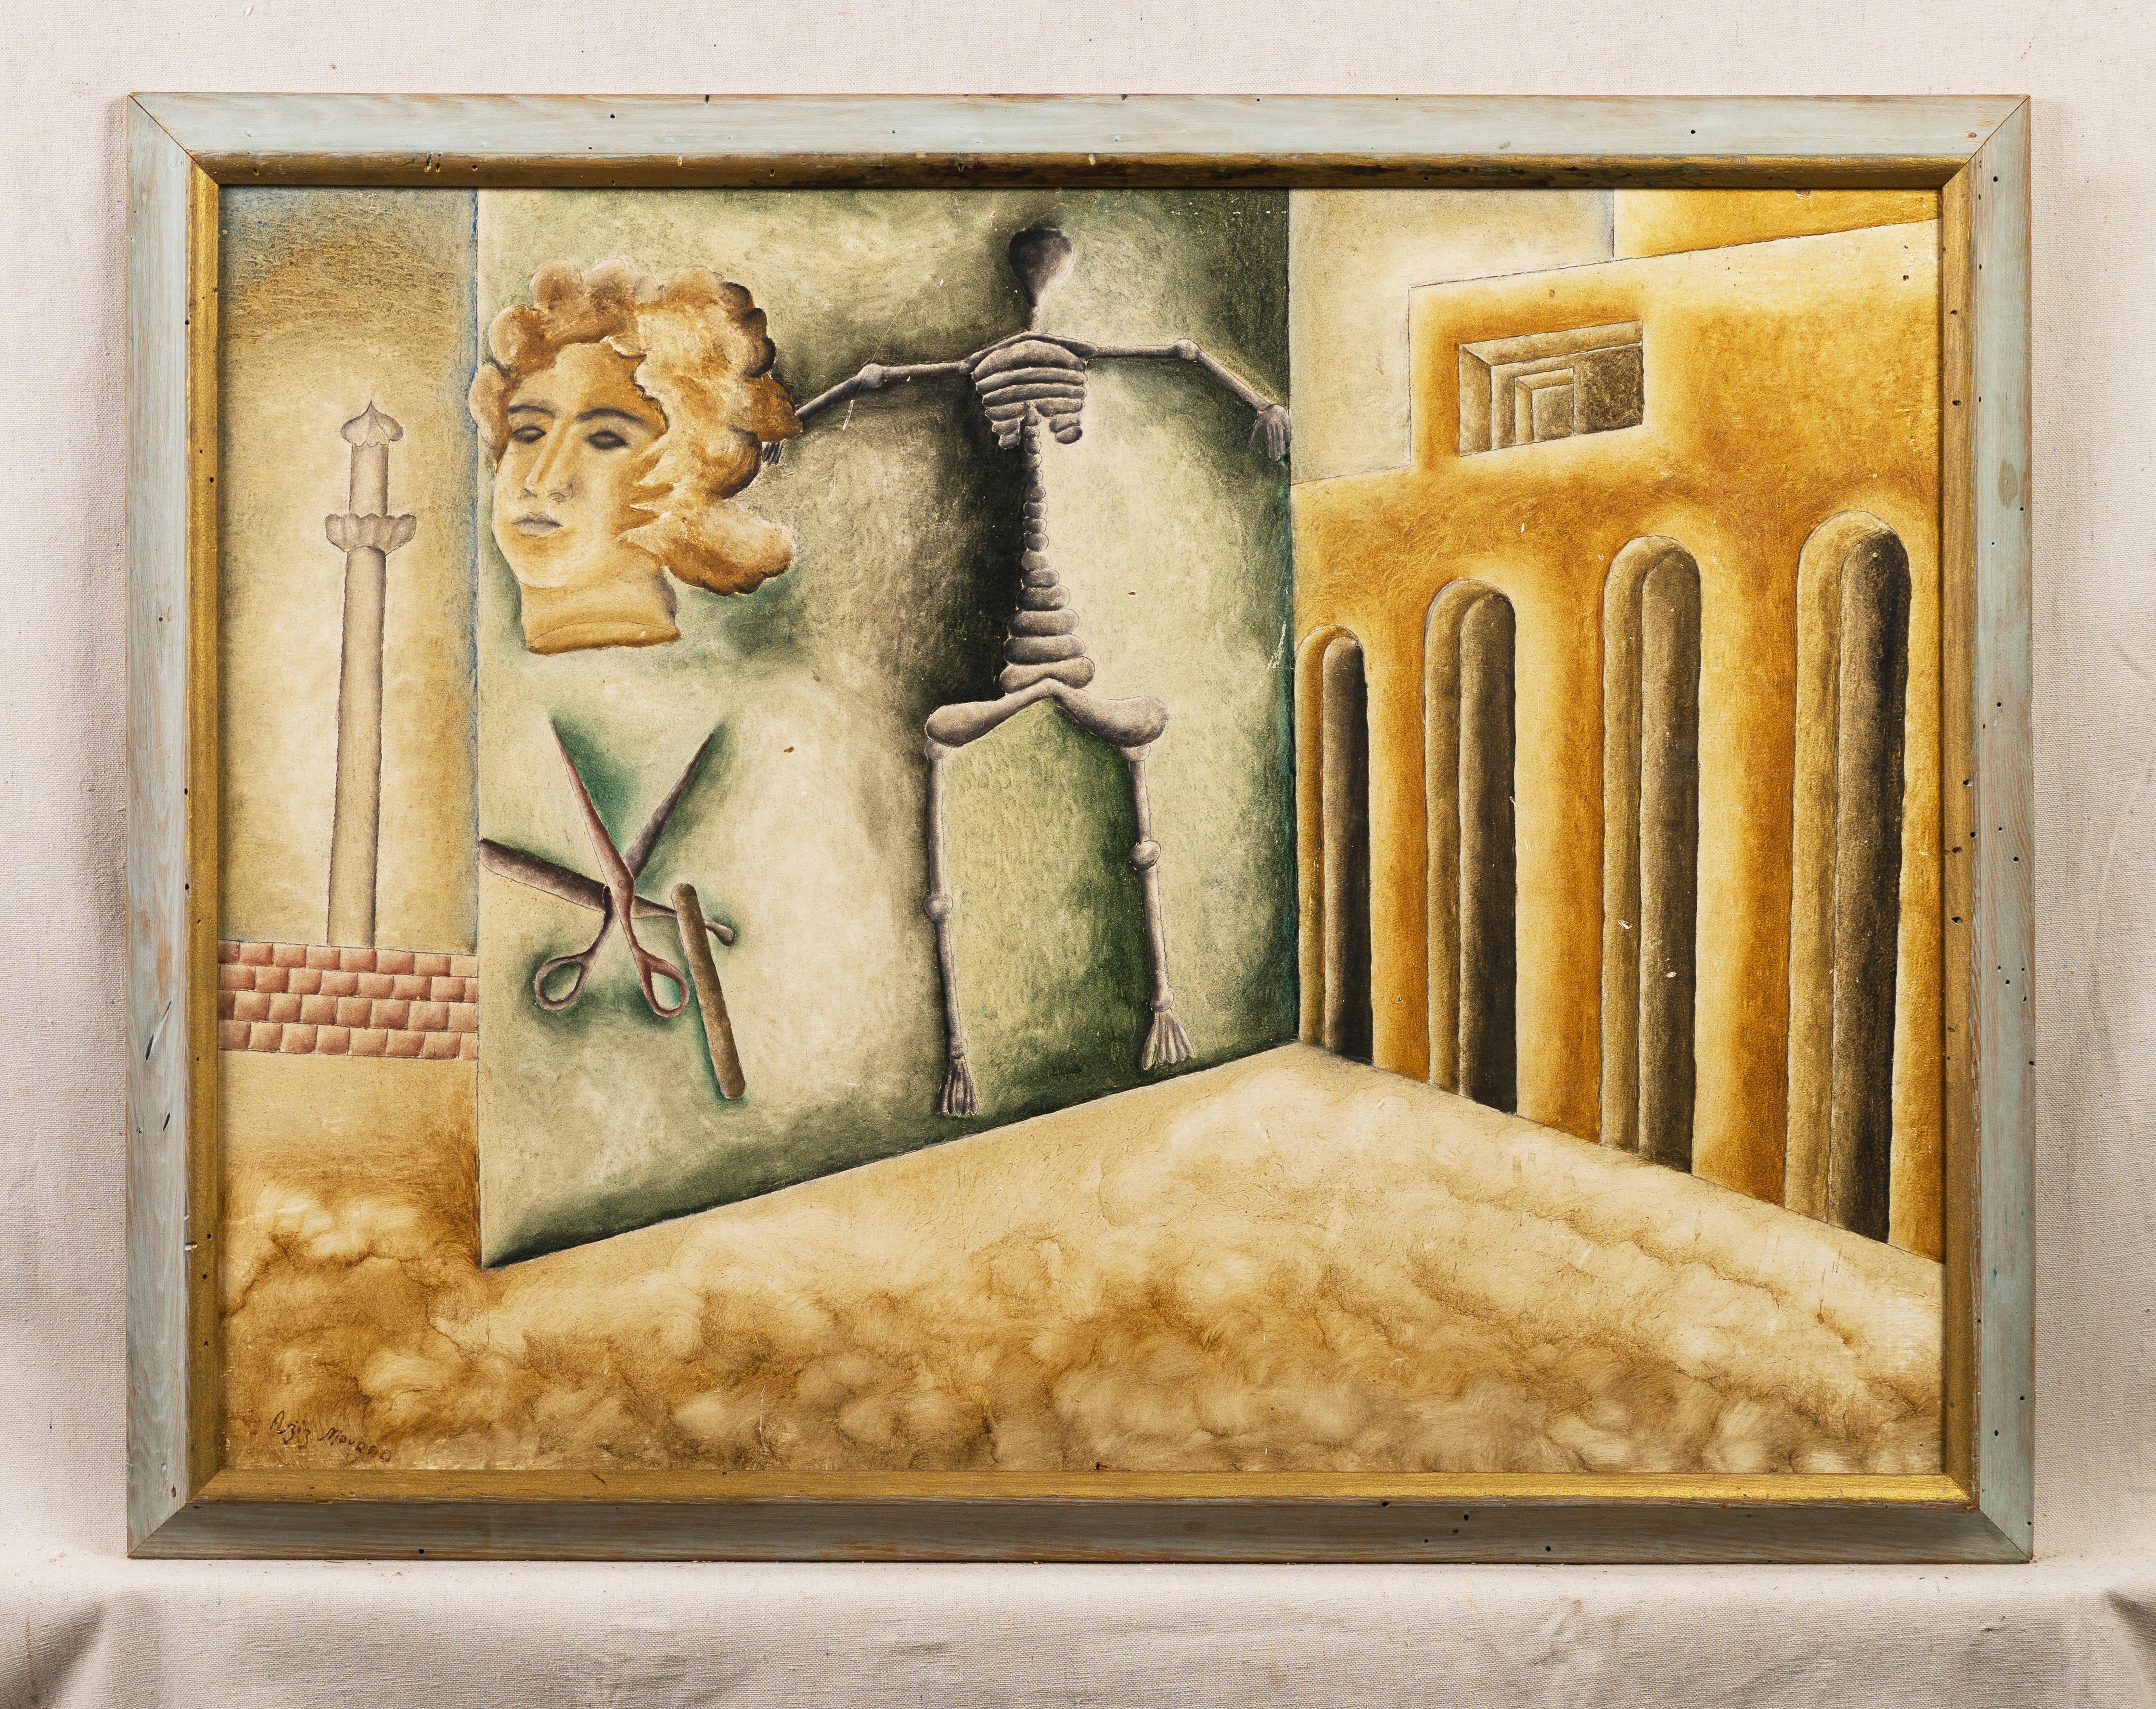 Antique American modernist surreal oil painting.  Oil on canvas.  Framed.  Signed illegibly.